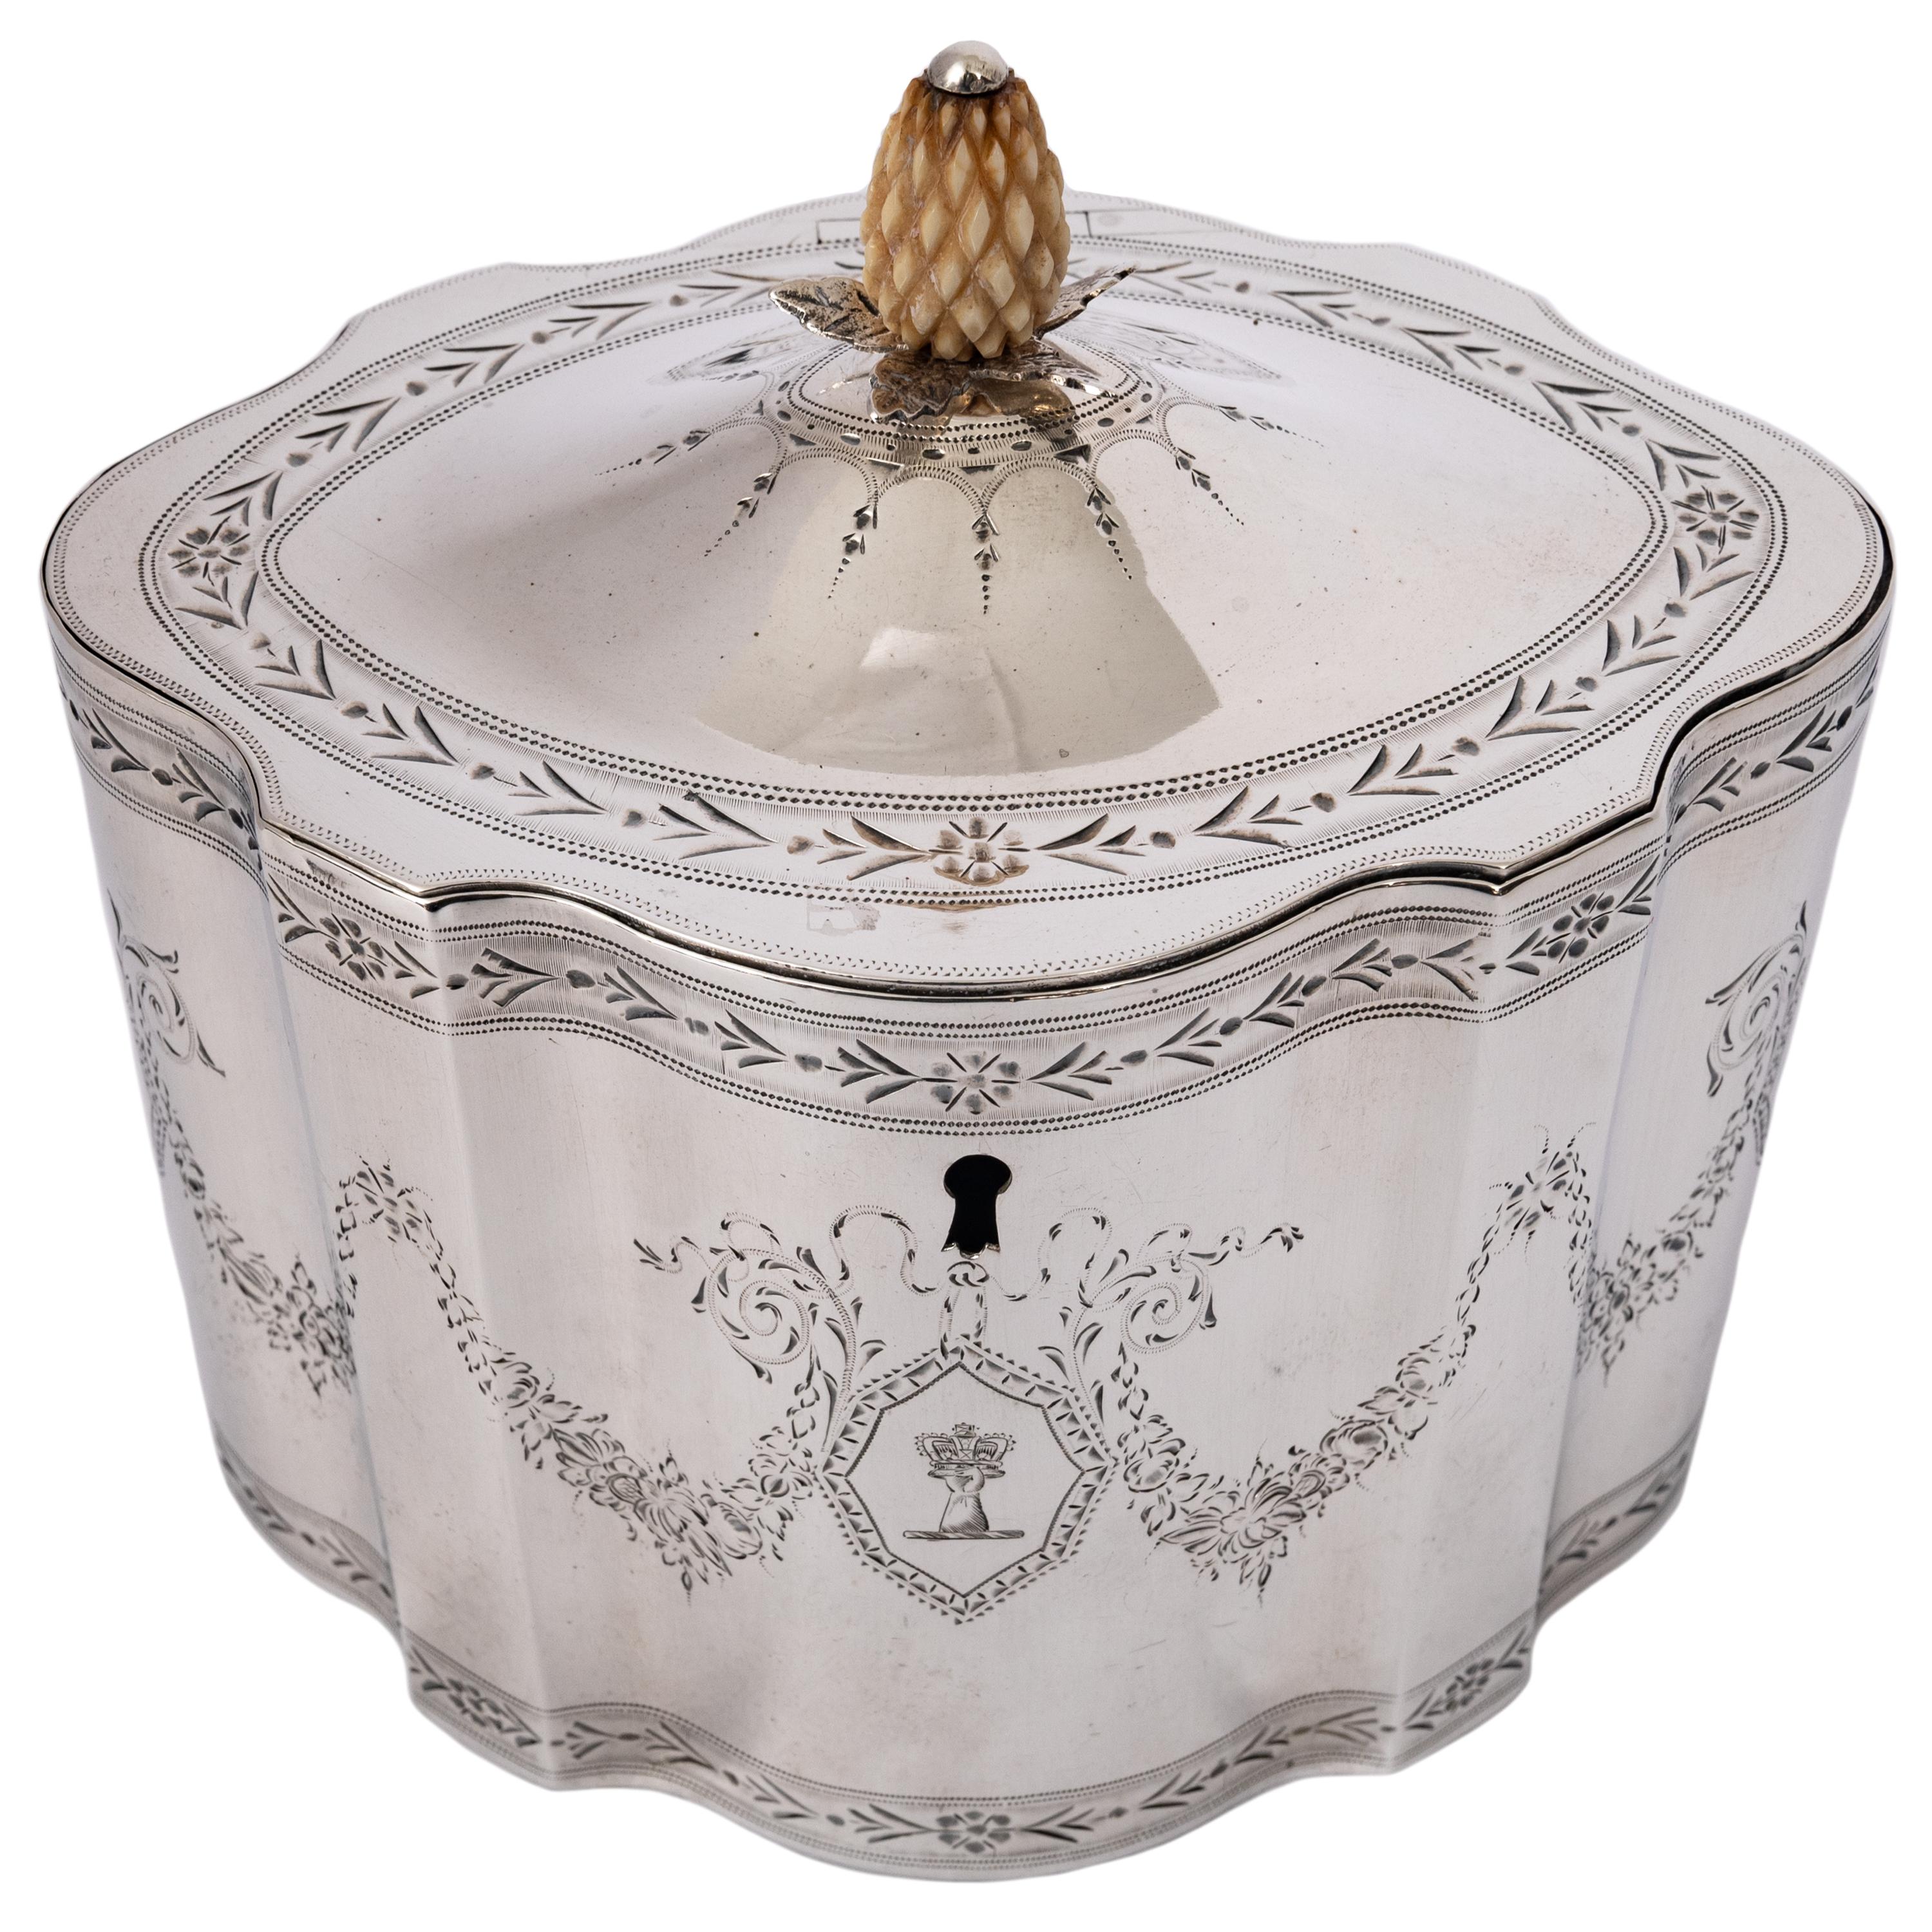 A fine antique Georgian engraved sterling silver tea caddy, by Henry Chawner, London, 1787.
Of fluted oval form with bright-cut floral borders with flower heads and having a hinged locking lid with a carved ivory pineapple finial with a silver